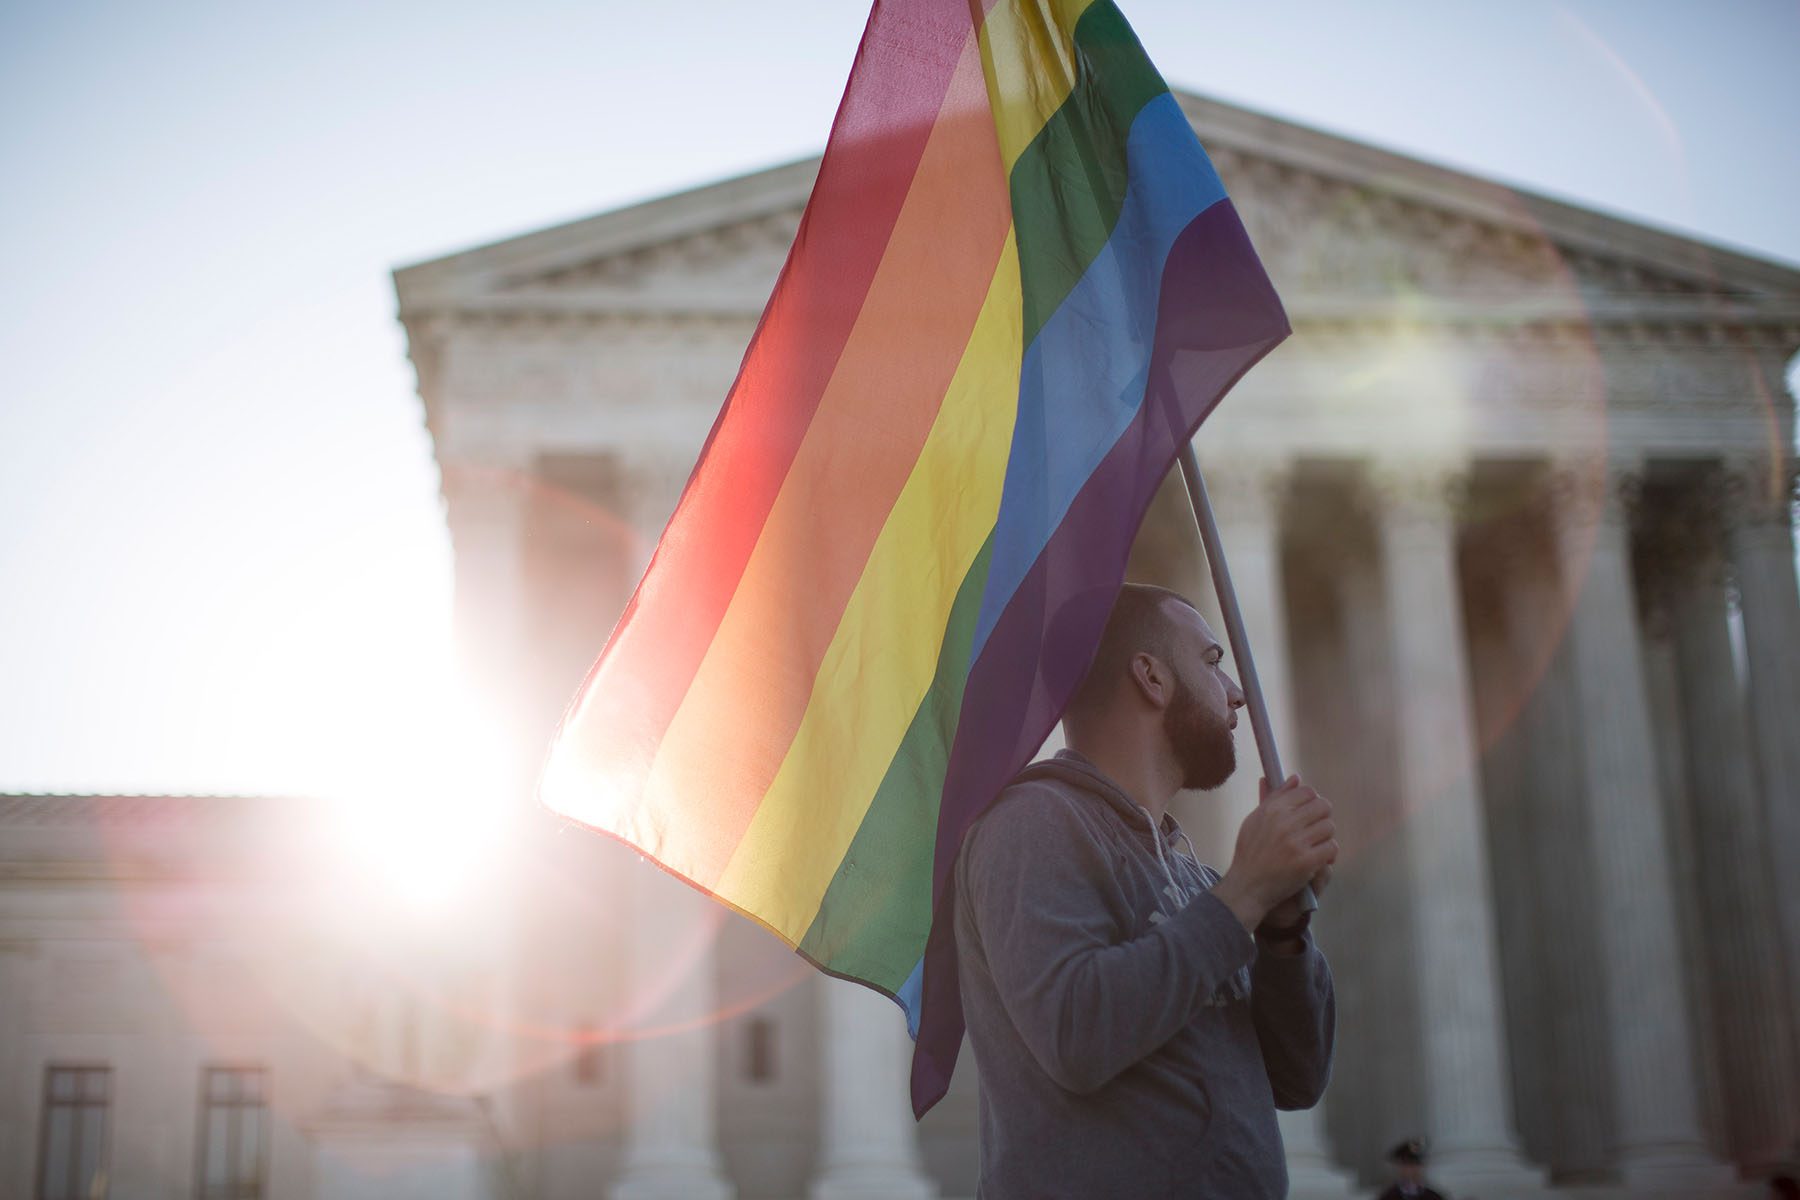 A supporter of same-sex marriage holds a pride flag near the Supreme Court.